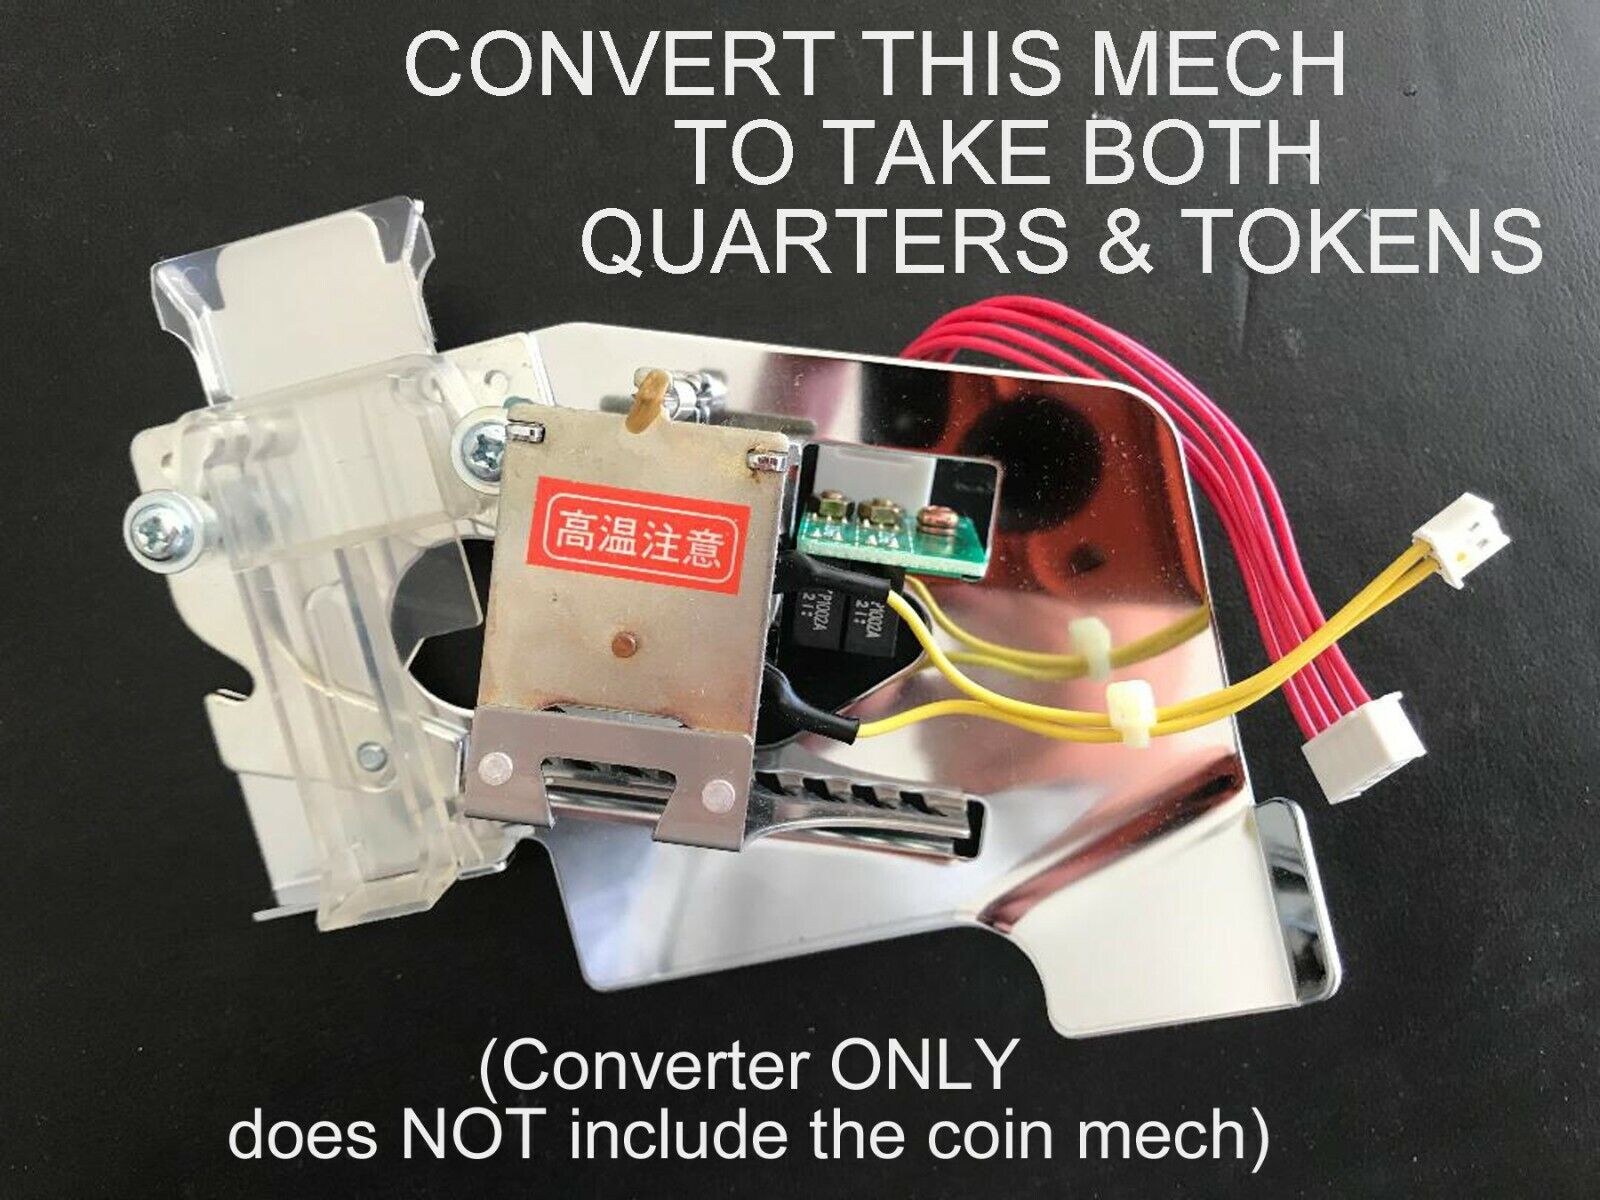 $.25 CONVERTER FOR YAMASA PACHISLO SLOT MACHINES, ACCEPTS BOTH QUARTERS & TOKENS